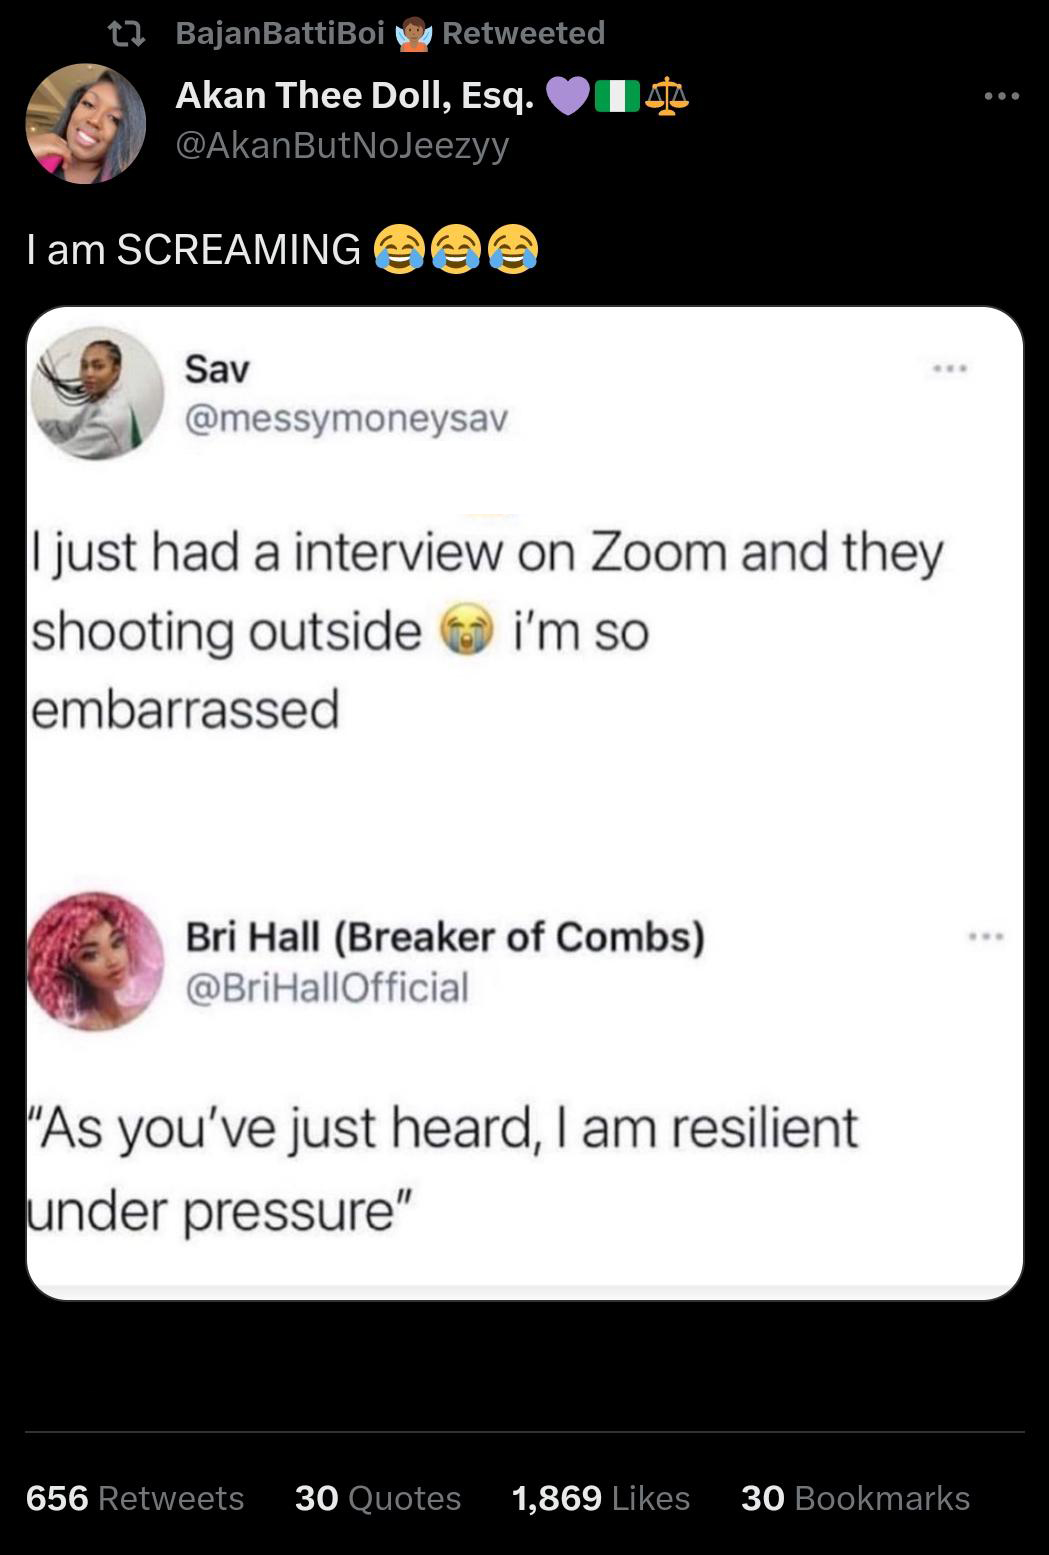 funny tweets and memes - screenshot - BajanBattiBoi Retweeted Akan Thee Doll, Esq. I am Screaming Sav Aa I just had a interview on Zoom and they shooting outside i'm so embarrassed Bri Hall Breaker of Combs "As you've just heard, I am resilient under pres